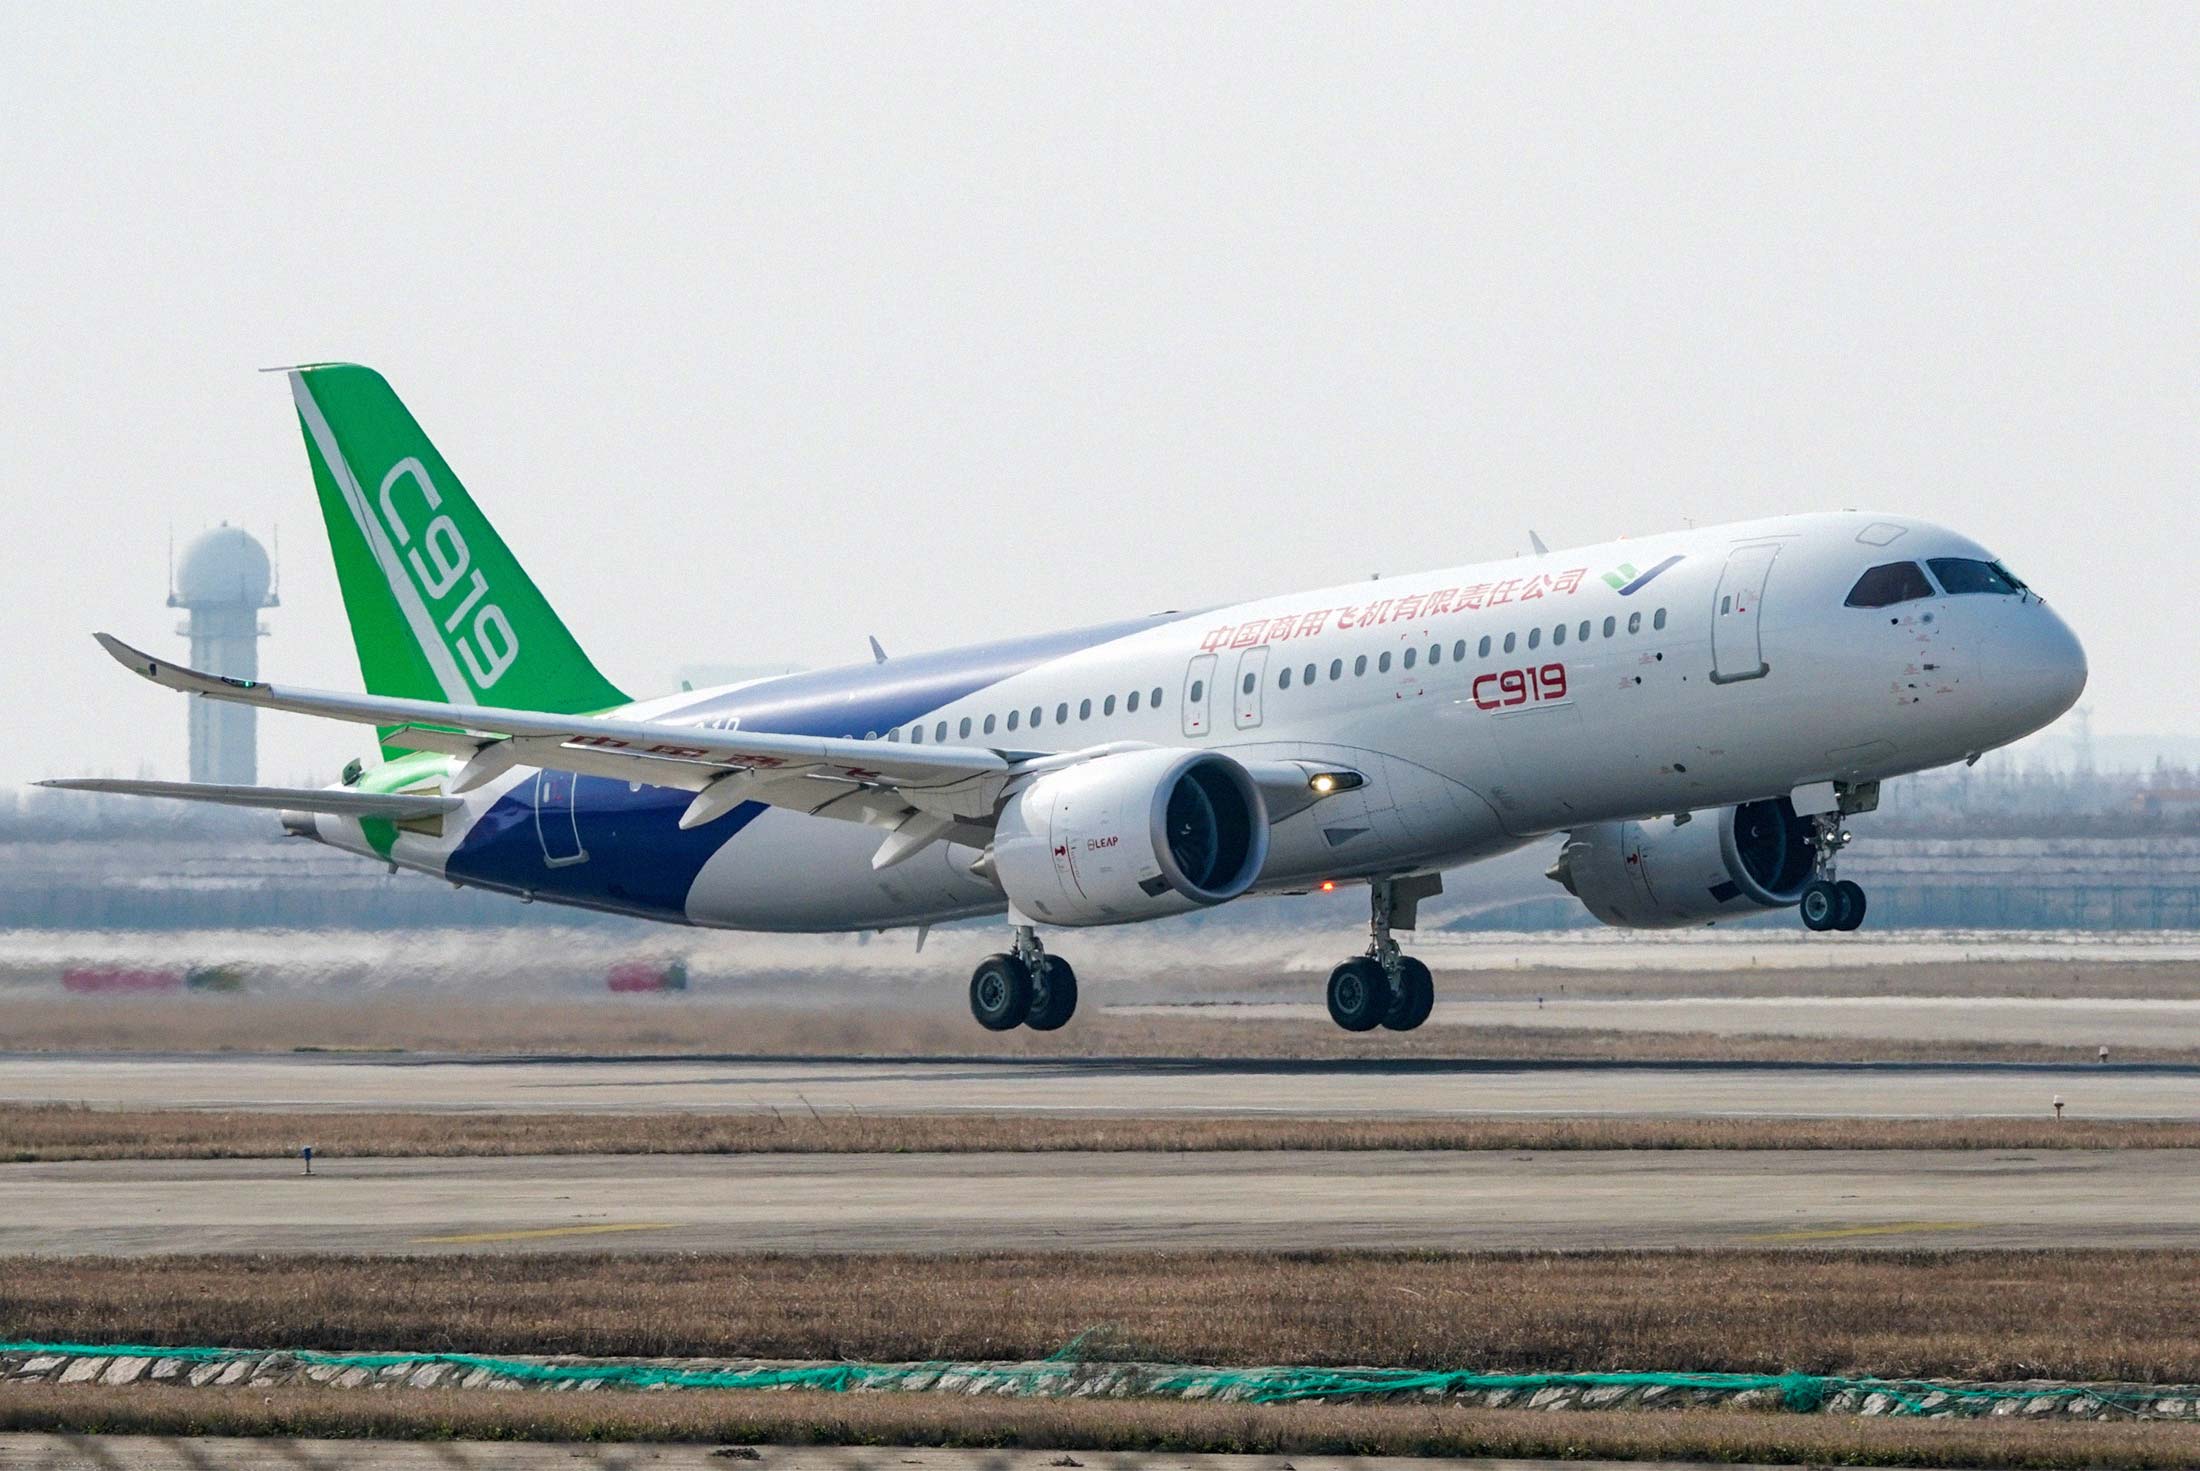 A Comac C919 takes off from Shanghai Pudong International Airport during its maiden flight on Dec. 28, 2018.